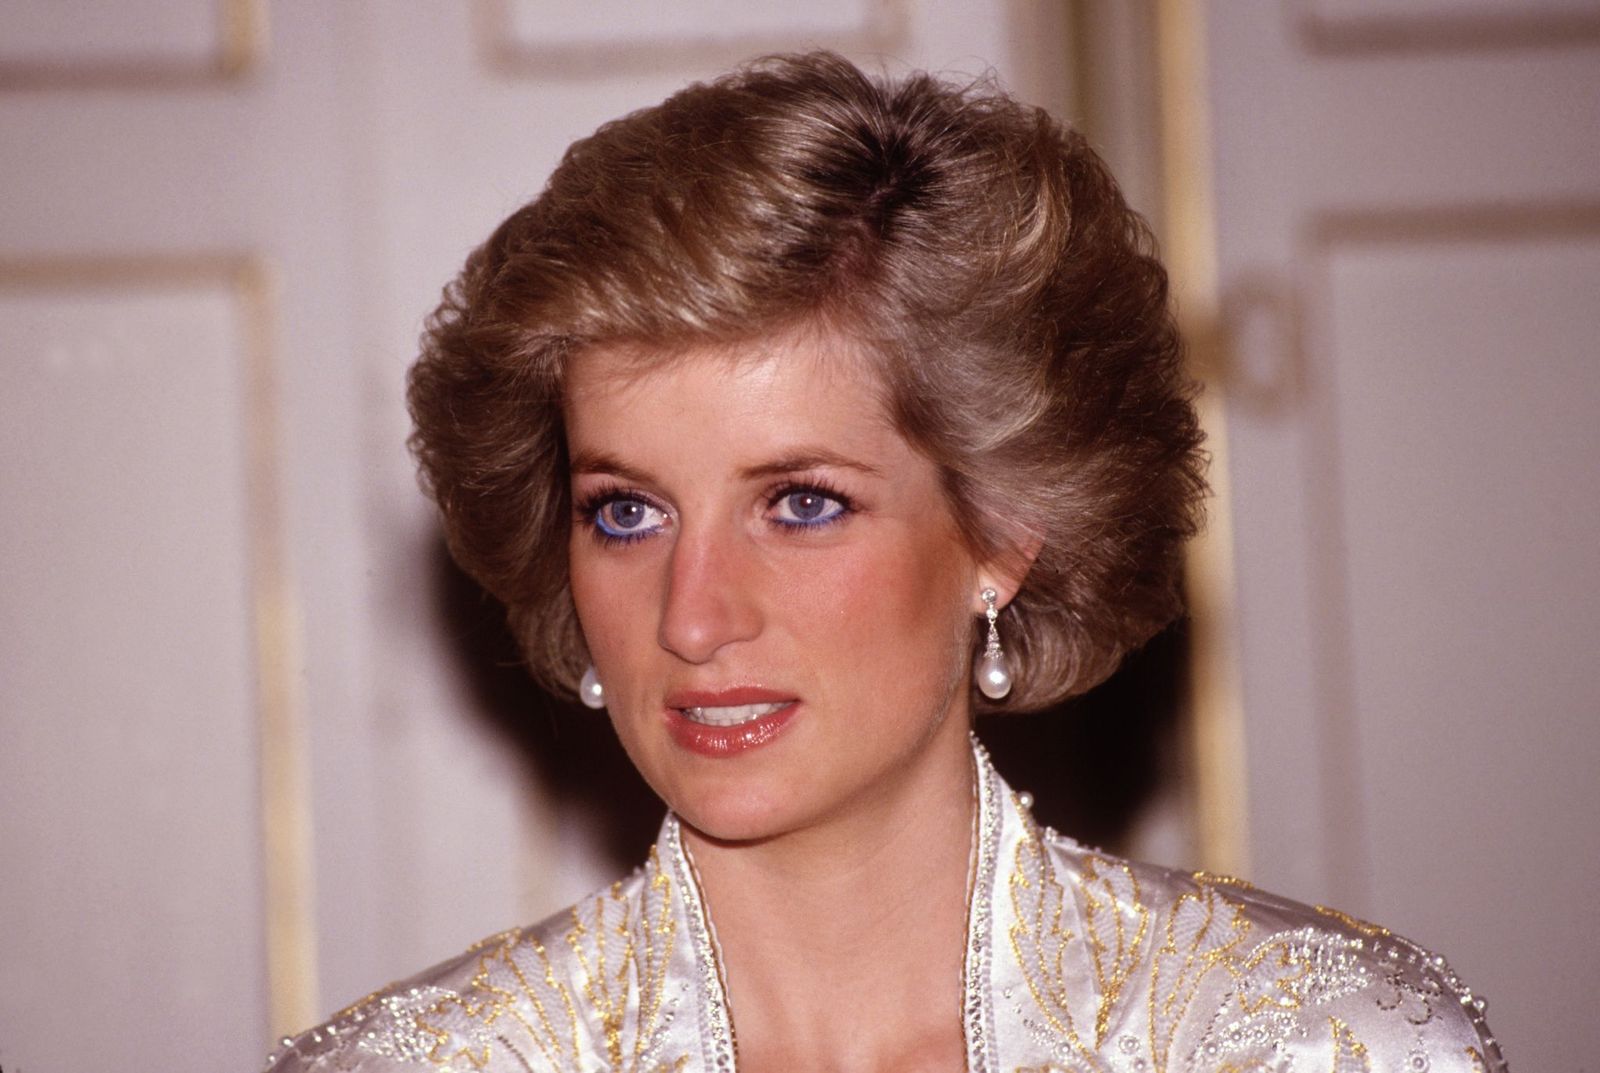 Princess Diana at a dinner given by President Mitterand in November 1988 at the Elysee Palace in Paris, France during the Royal Tour of France | Photo: David Levenson/Getty Images